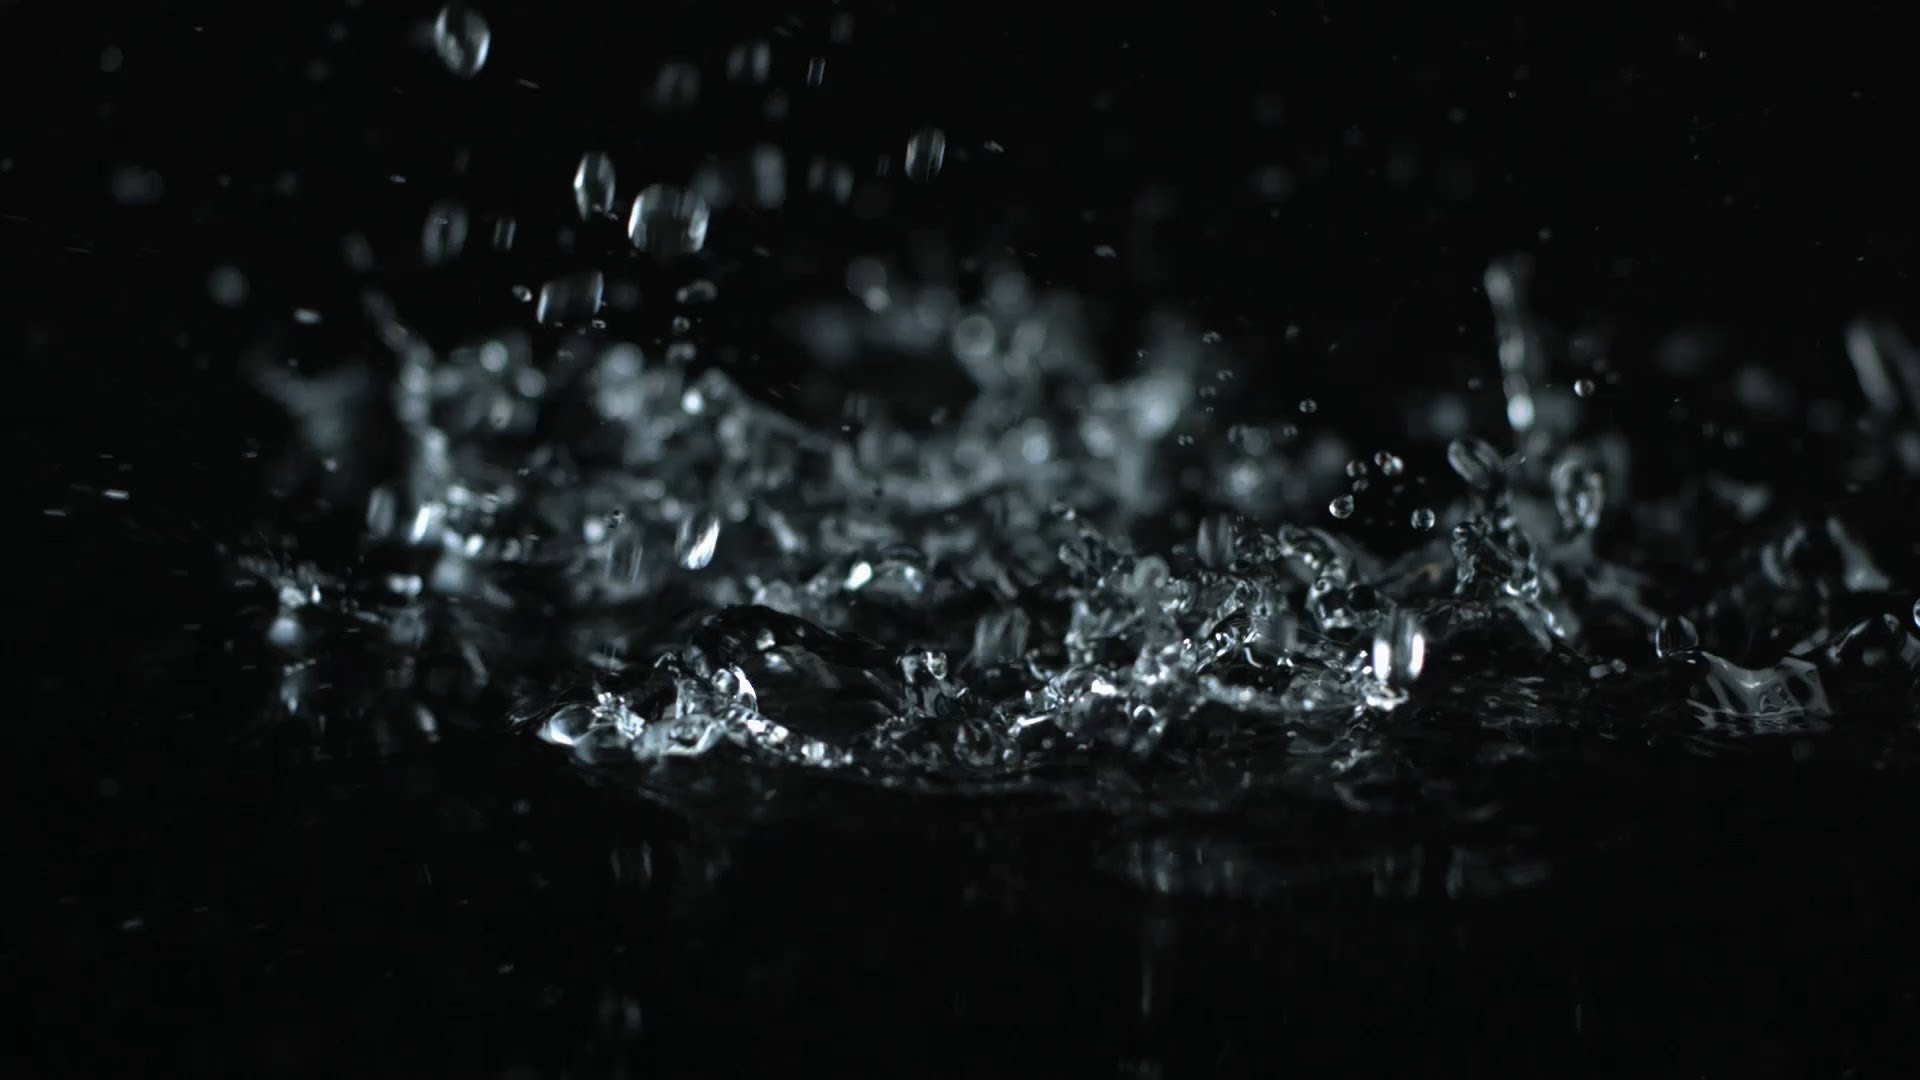 Free Slow Motion Footage: Water Drops on Black - YouTube